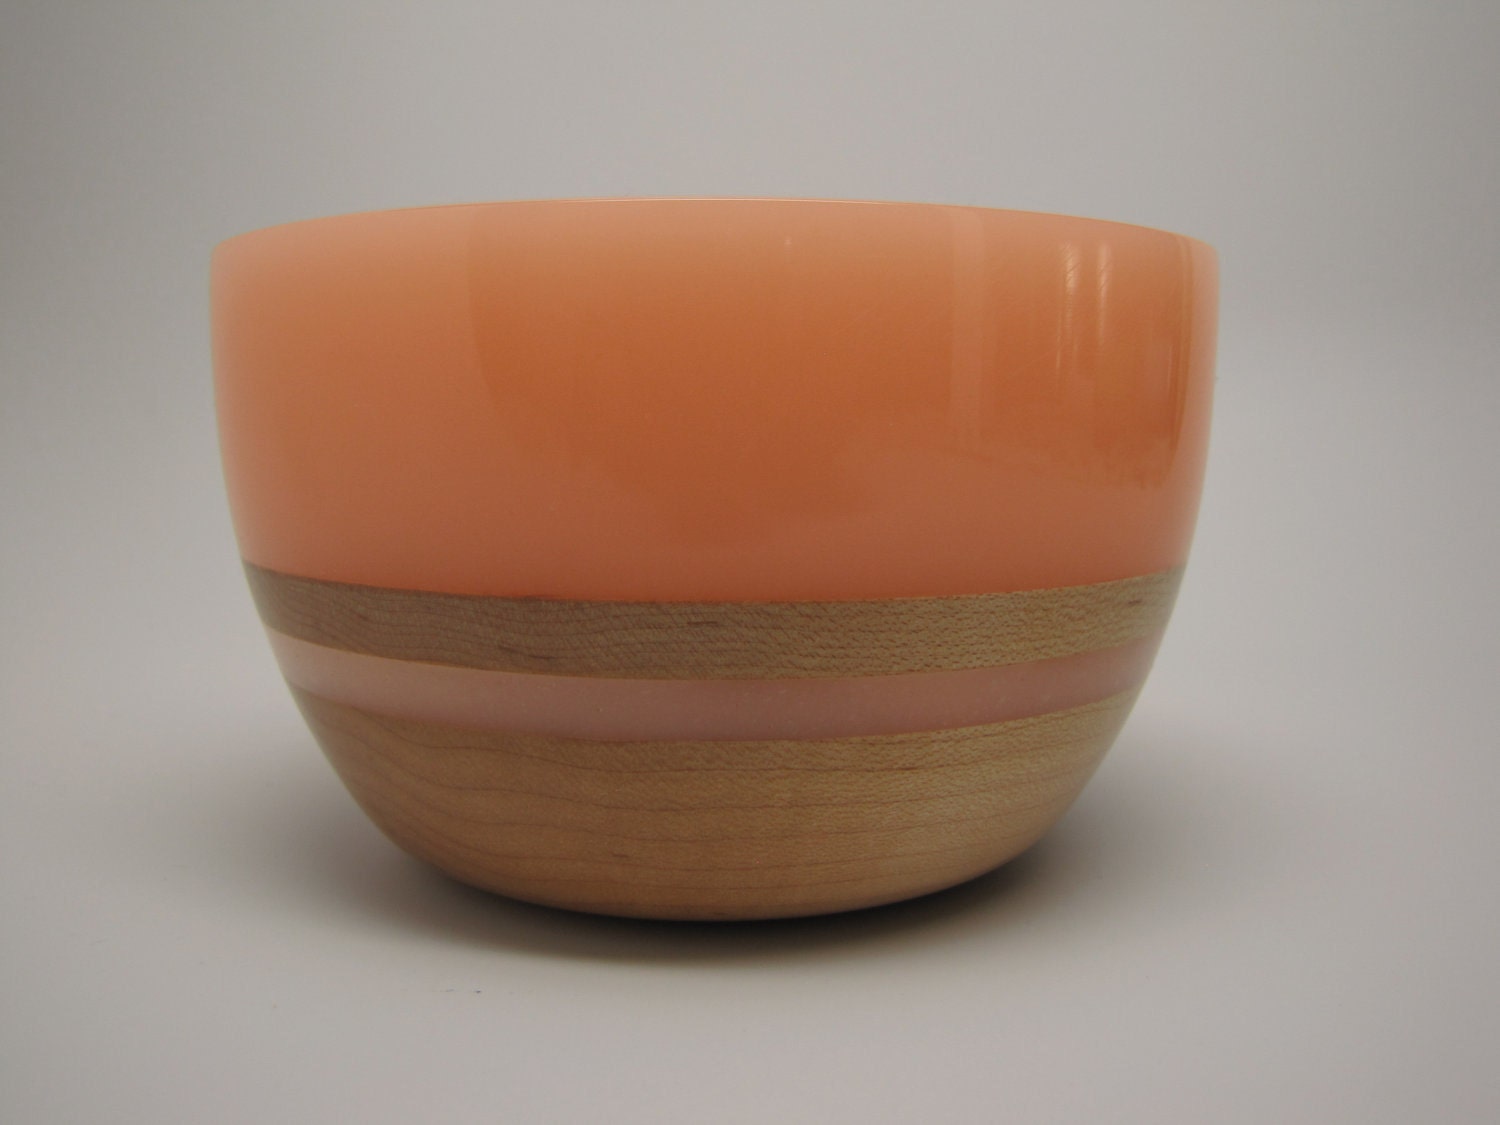 Hard Wood Maple Bowl with a Frost Lite-Orange Top & Inlay